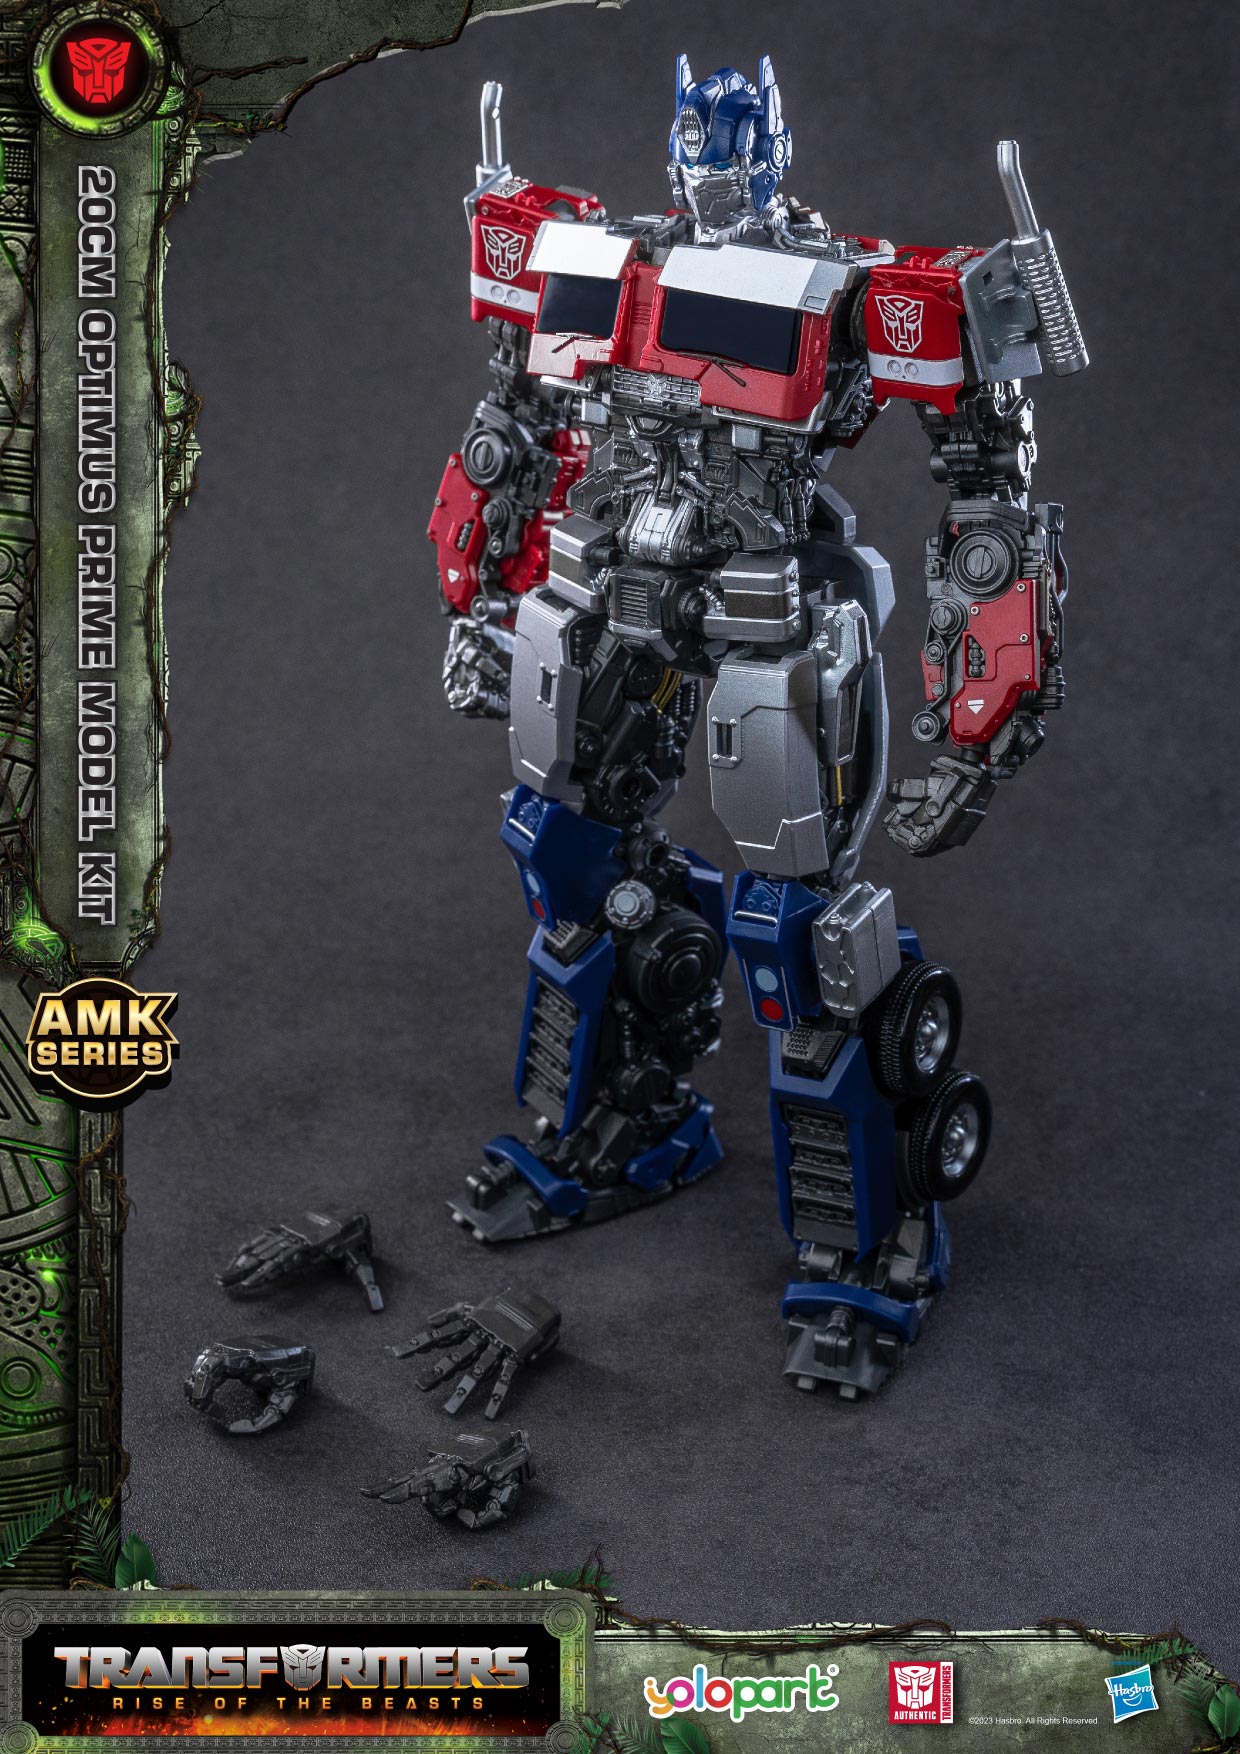 Transformers Toys Optimus Prime, 7.87 Inch Transformers Rise of The Beast  Toys, Highly Articulated No Converting Transformers Model Kit, Action